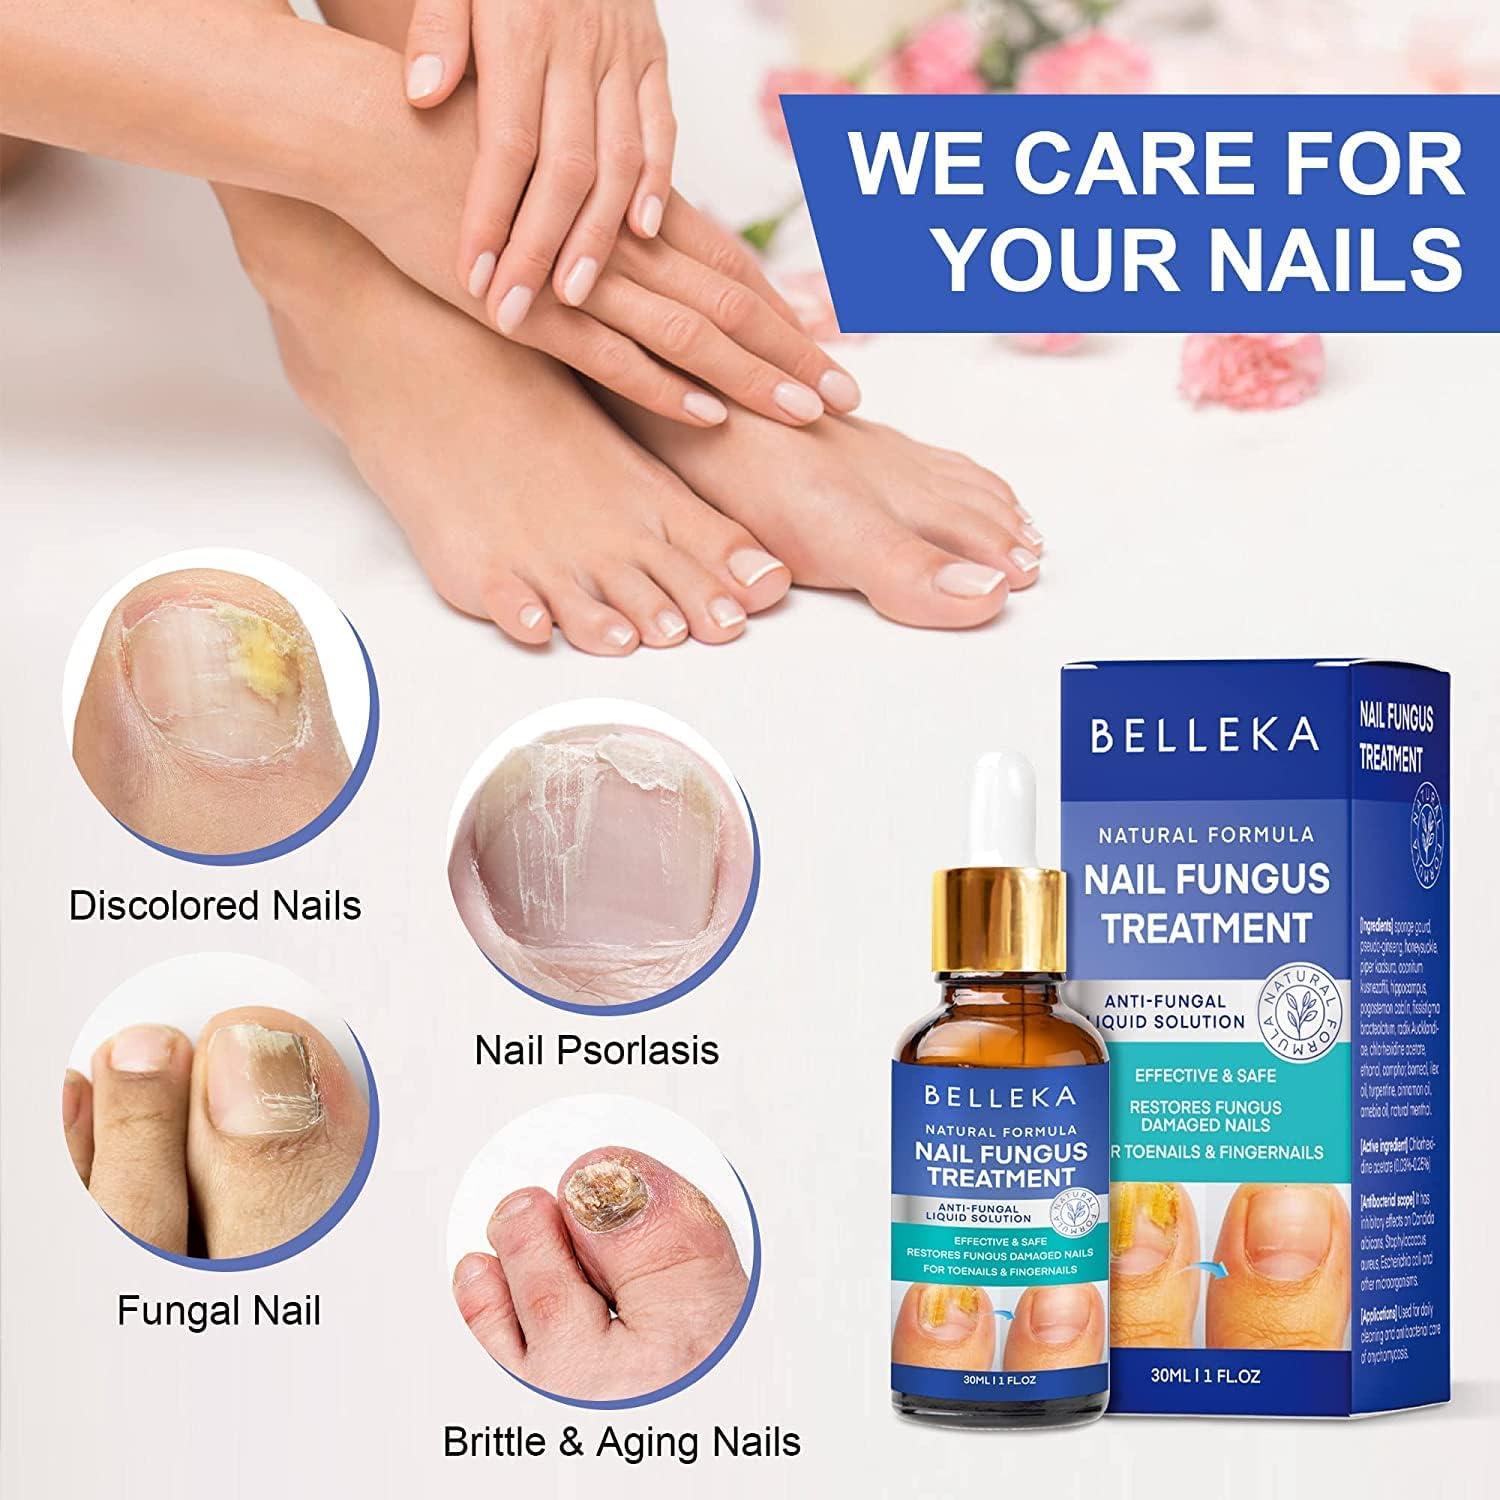 Fungal Nails - Hunter Podiatry Services